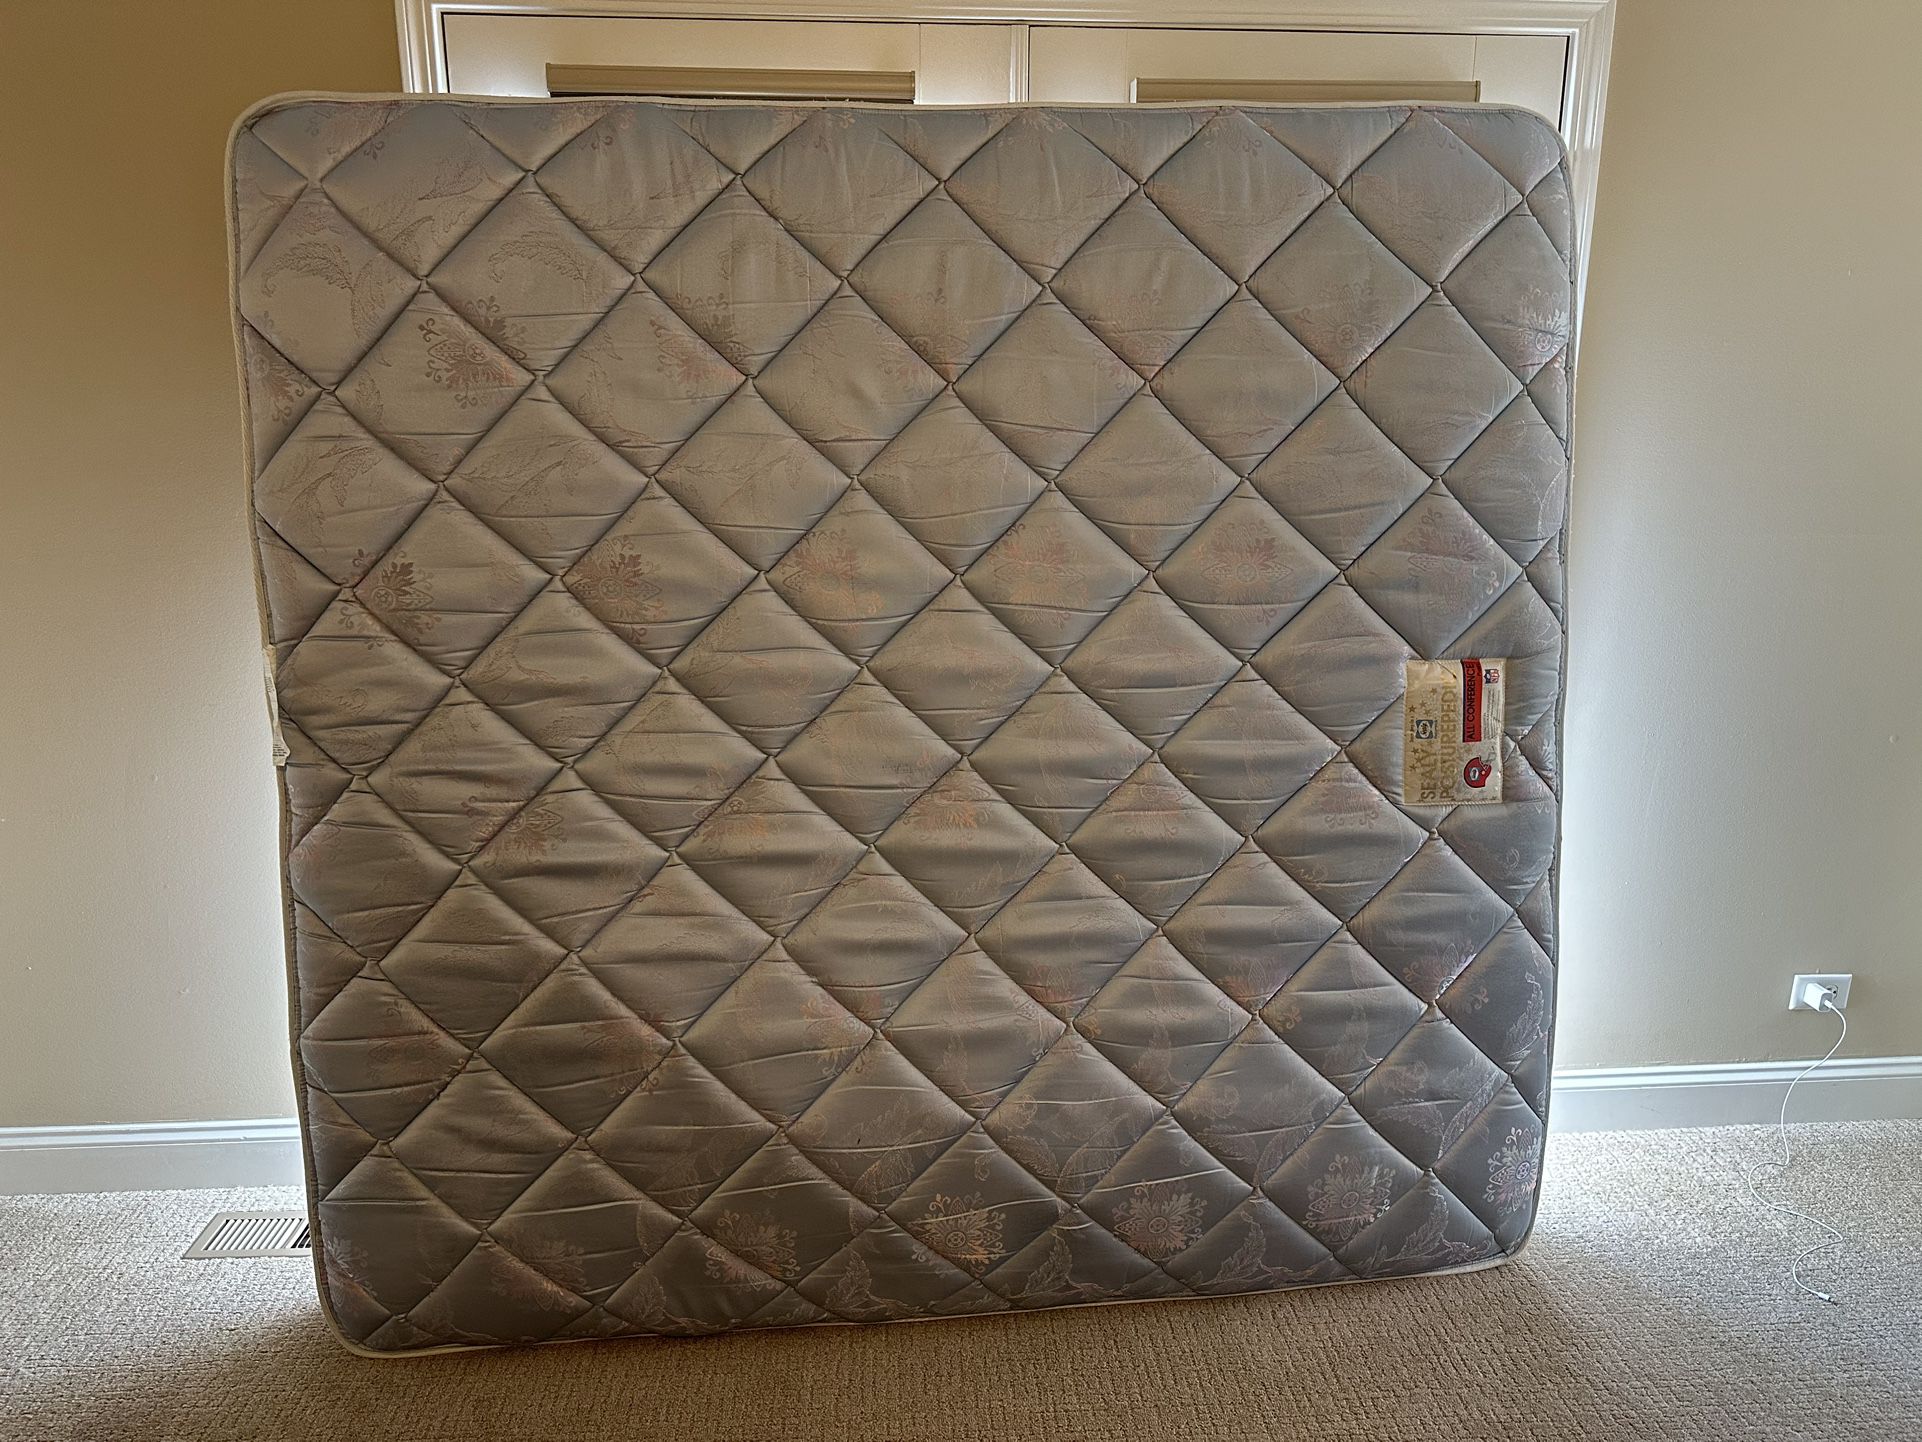 King Size Mattress W/2 Piece Box Spring (not Picture)